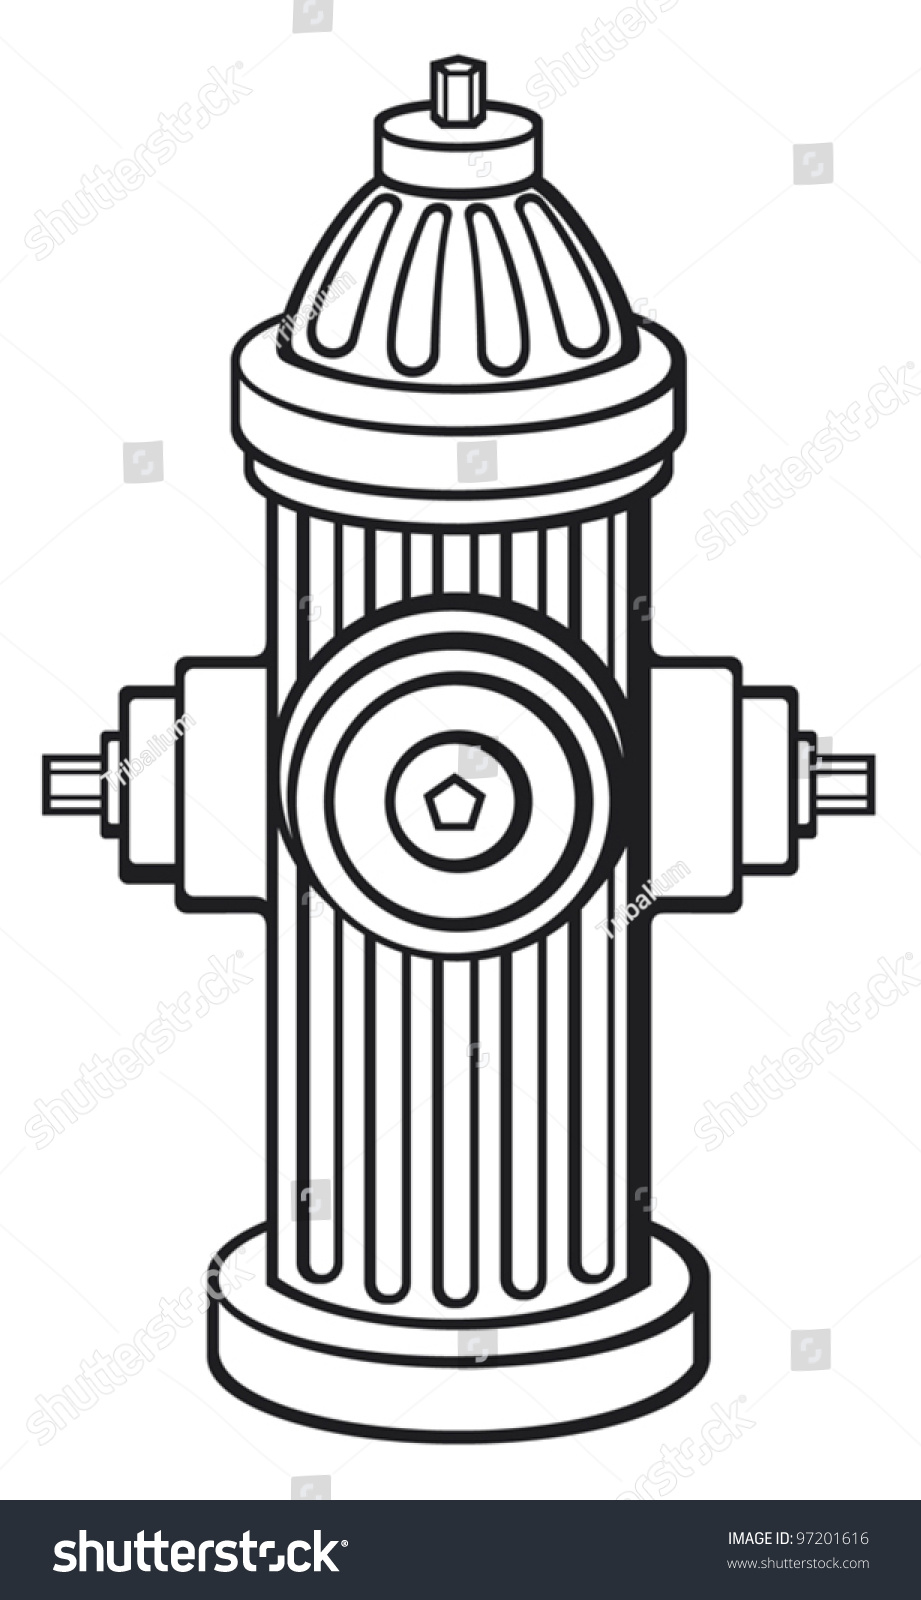 clipart of fire hydrants - photo #50